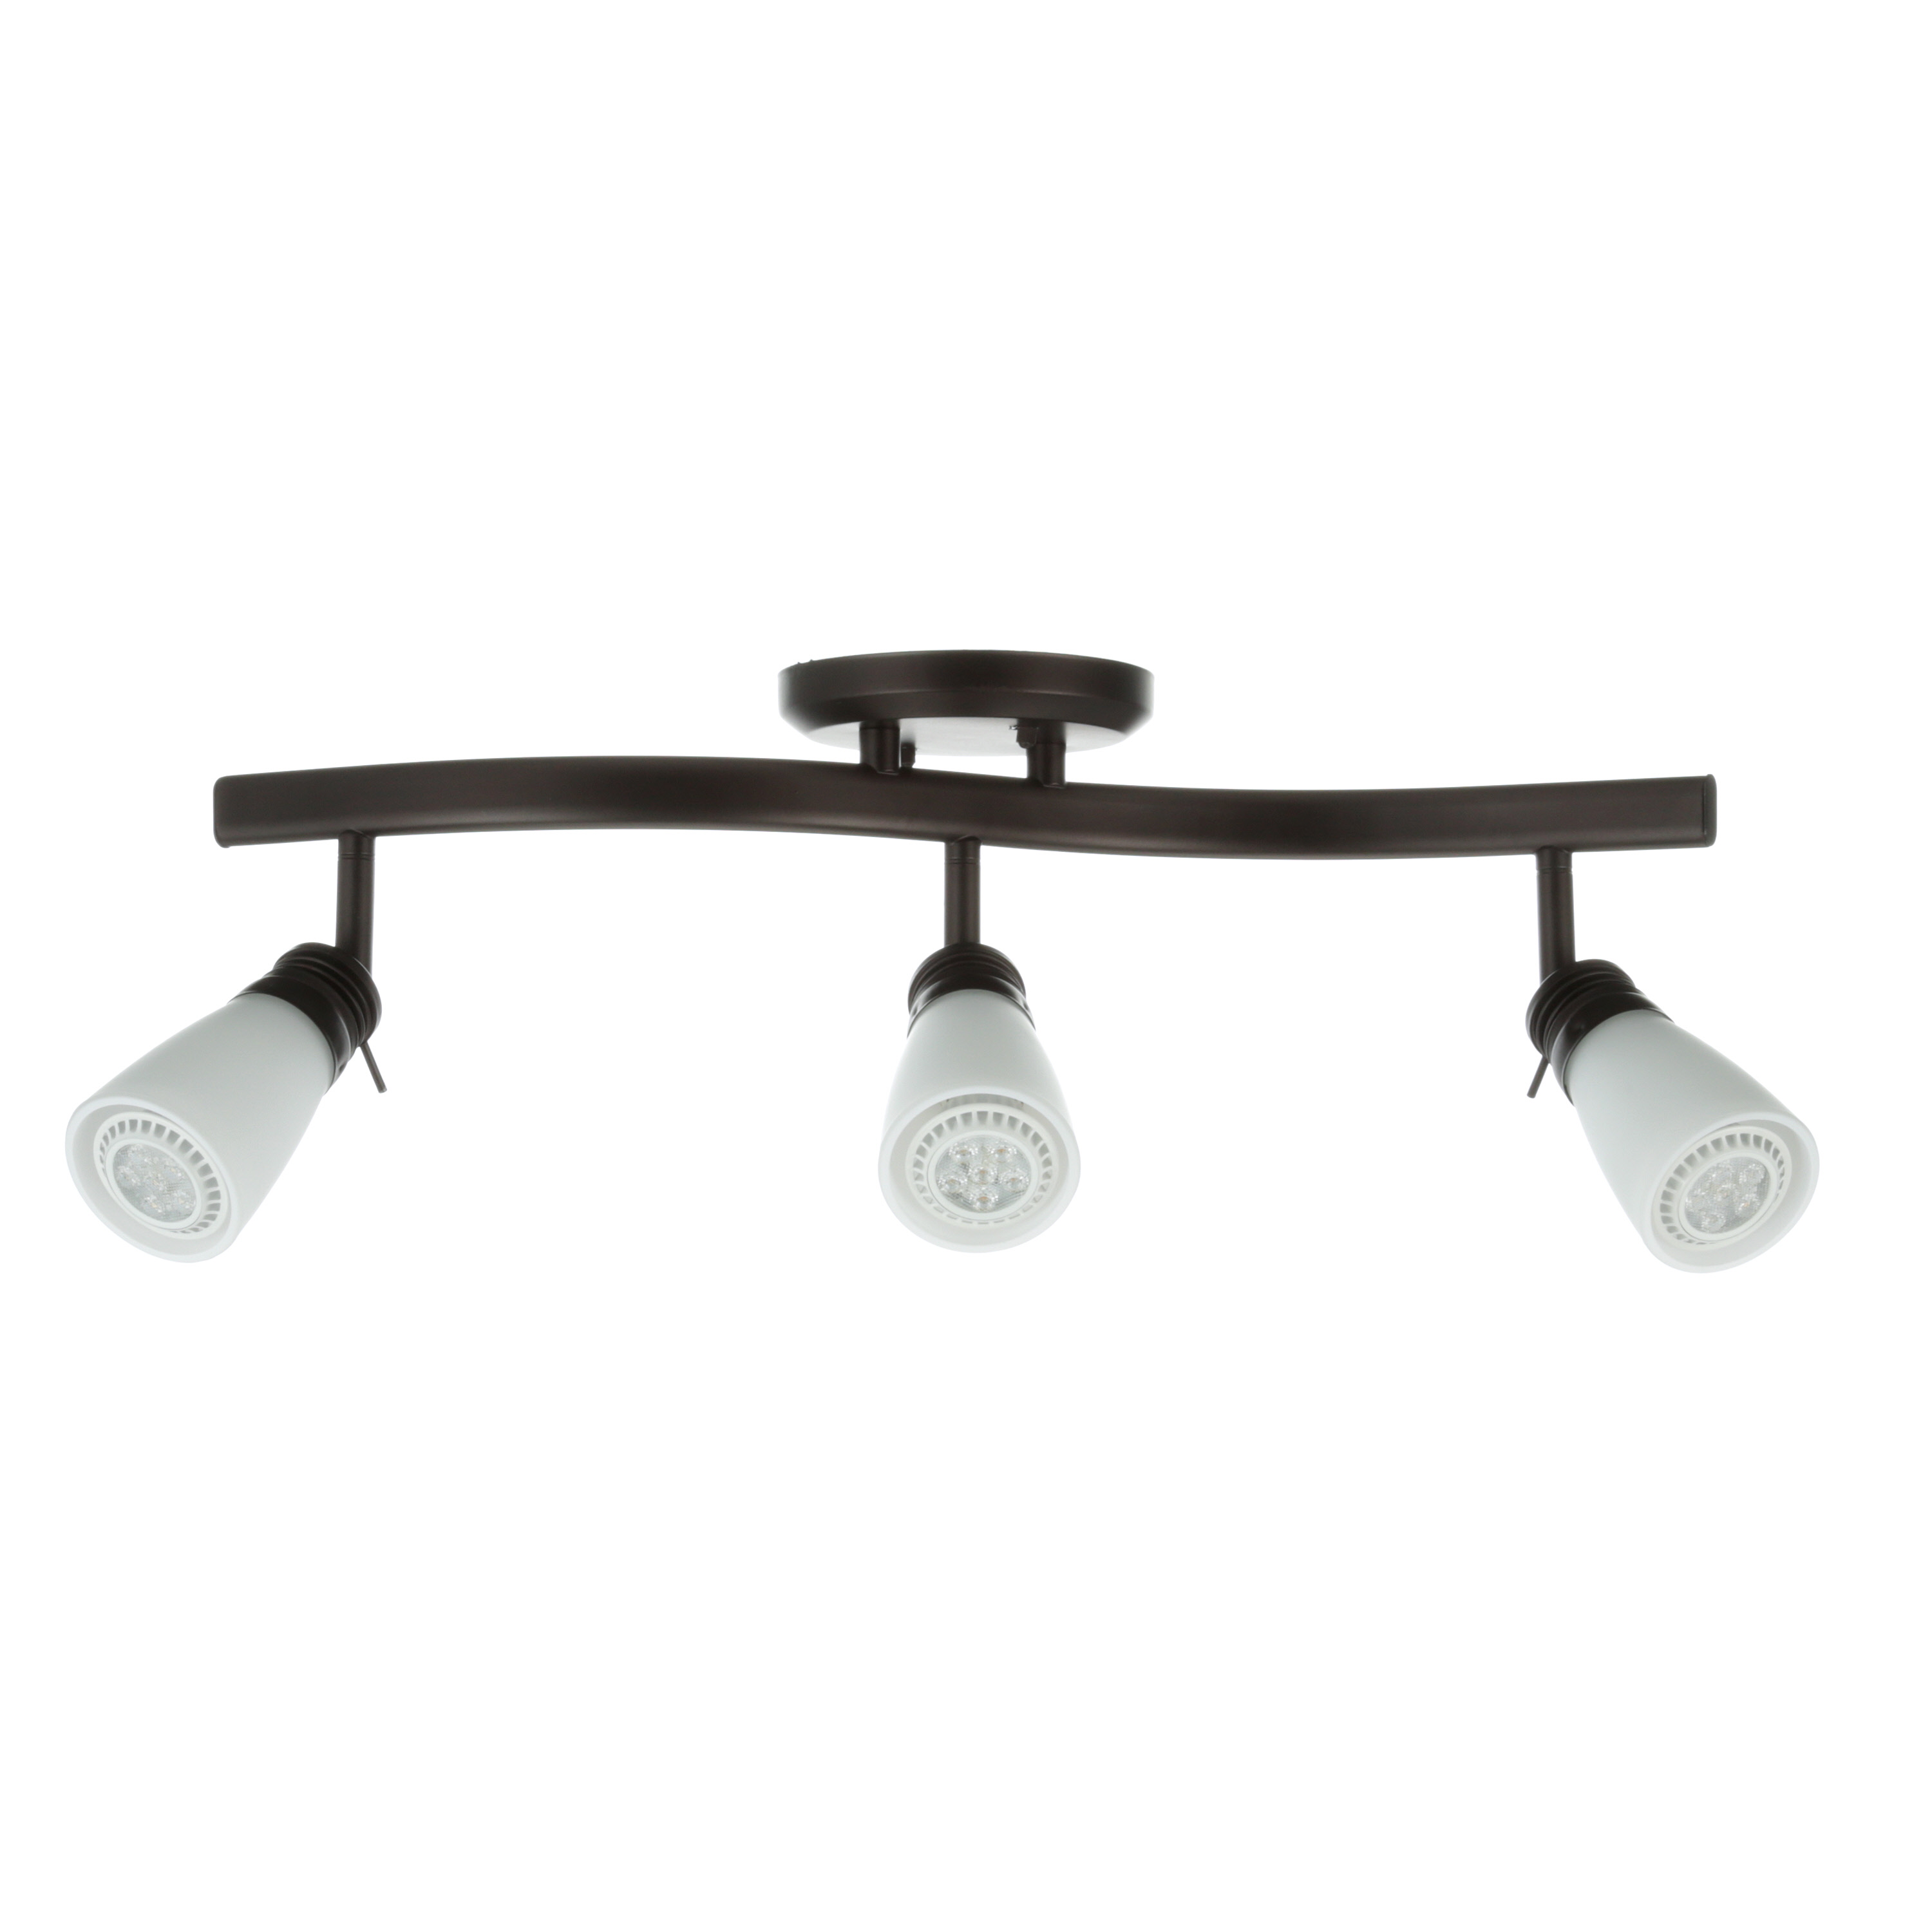 Chapter decorTrack Ceiling Light, 3 Lights, Oil-Rubbed Bronze Finish - image 3 of 5